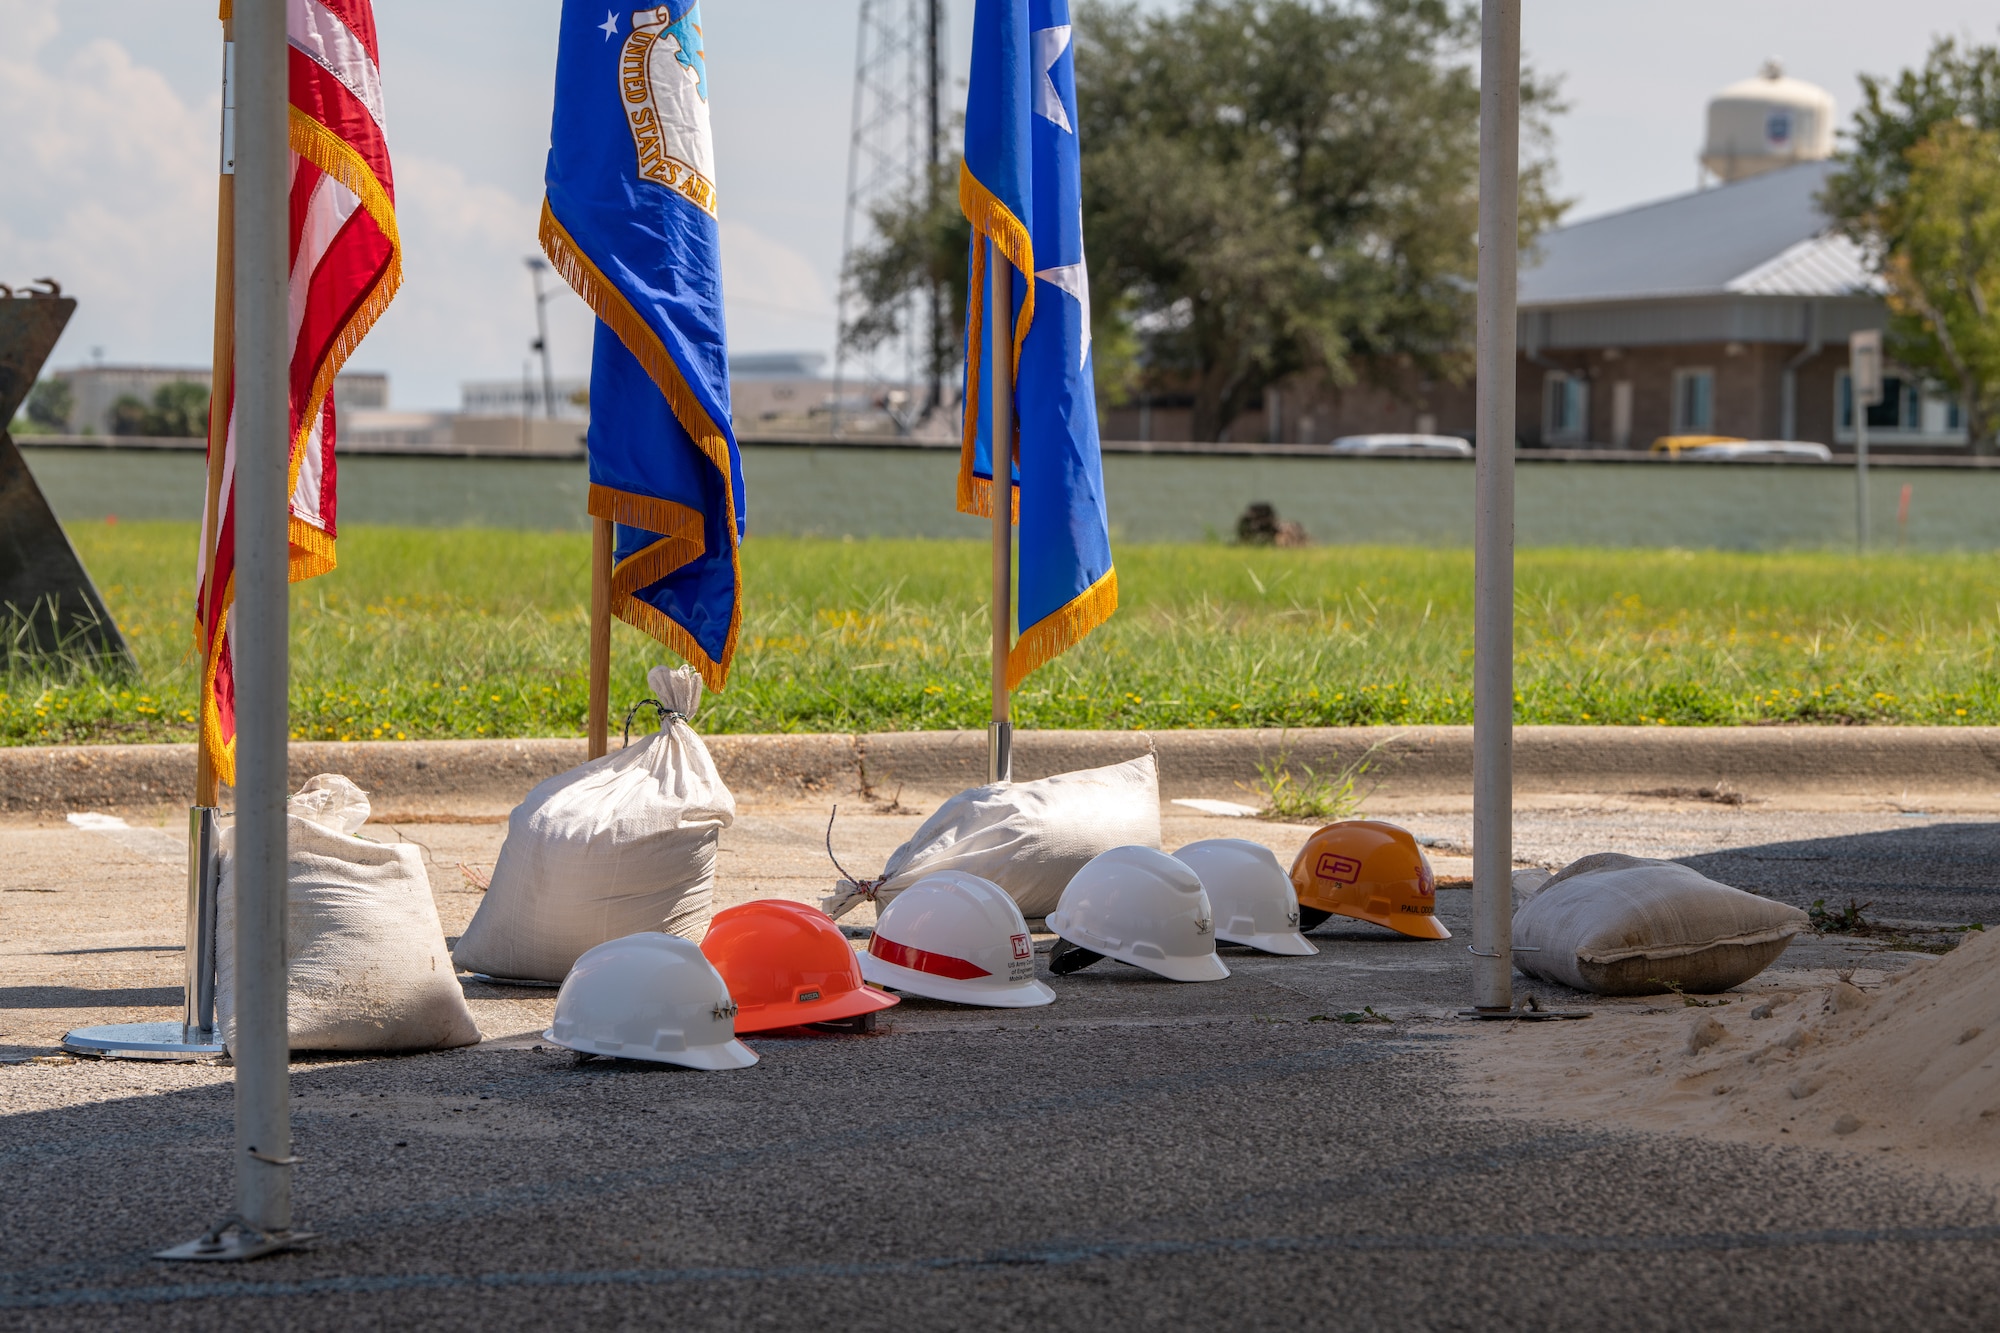 Hard hats lay on ground during ceremony